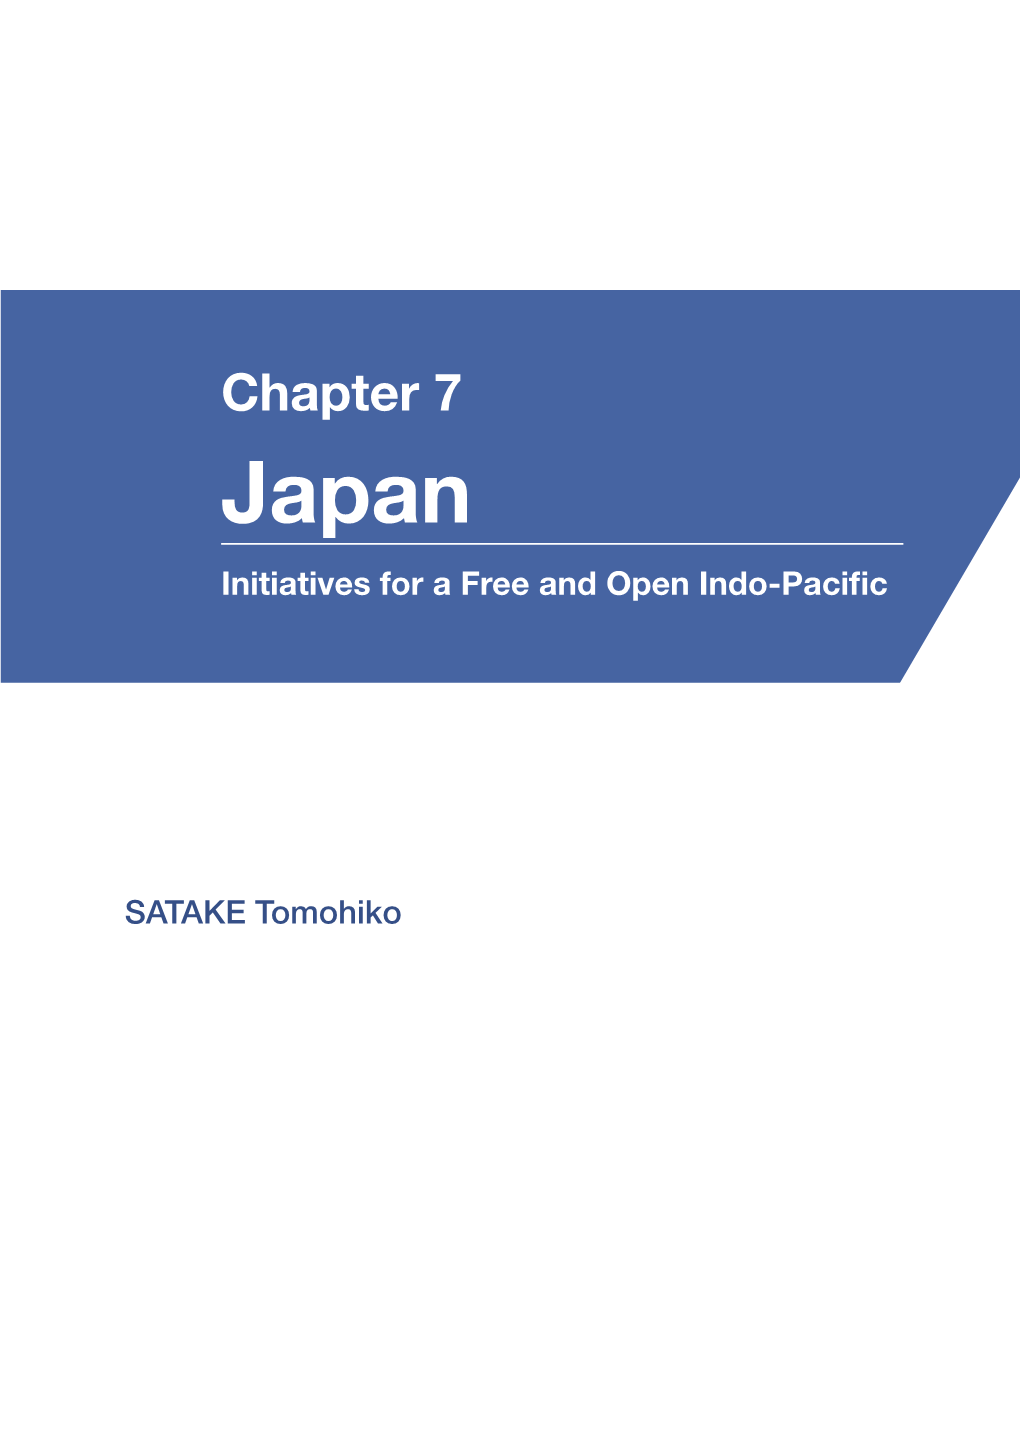 Chapter 7 Japan Initiatives for a Free and Open Indo-Pacific